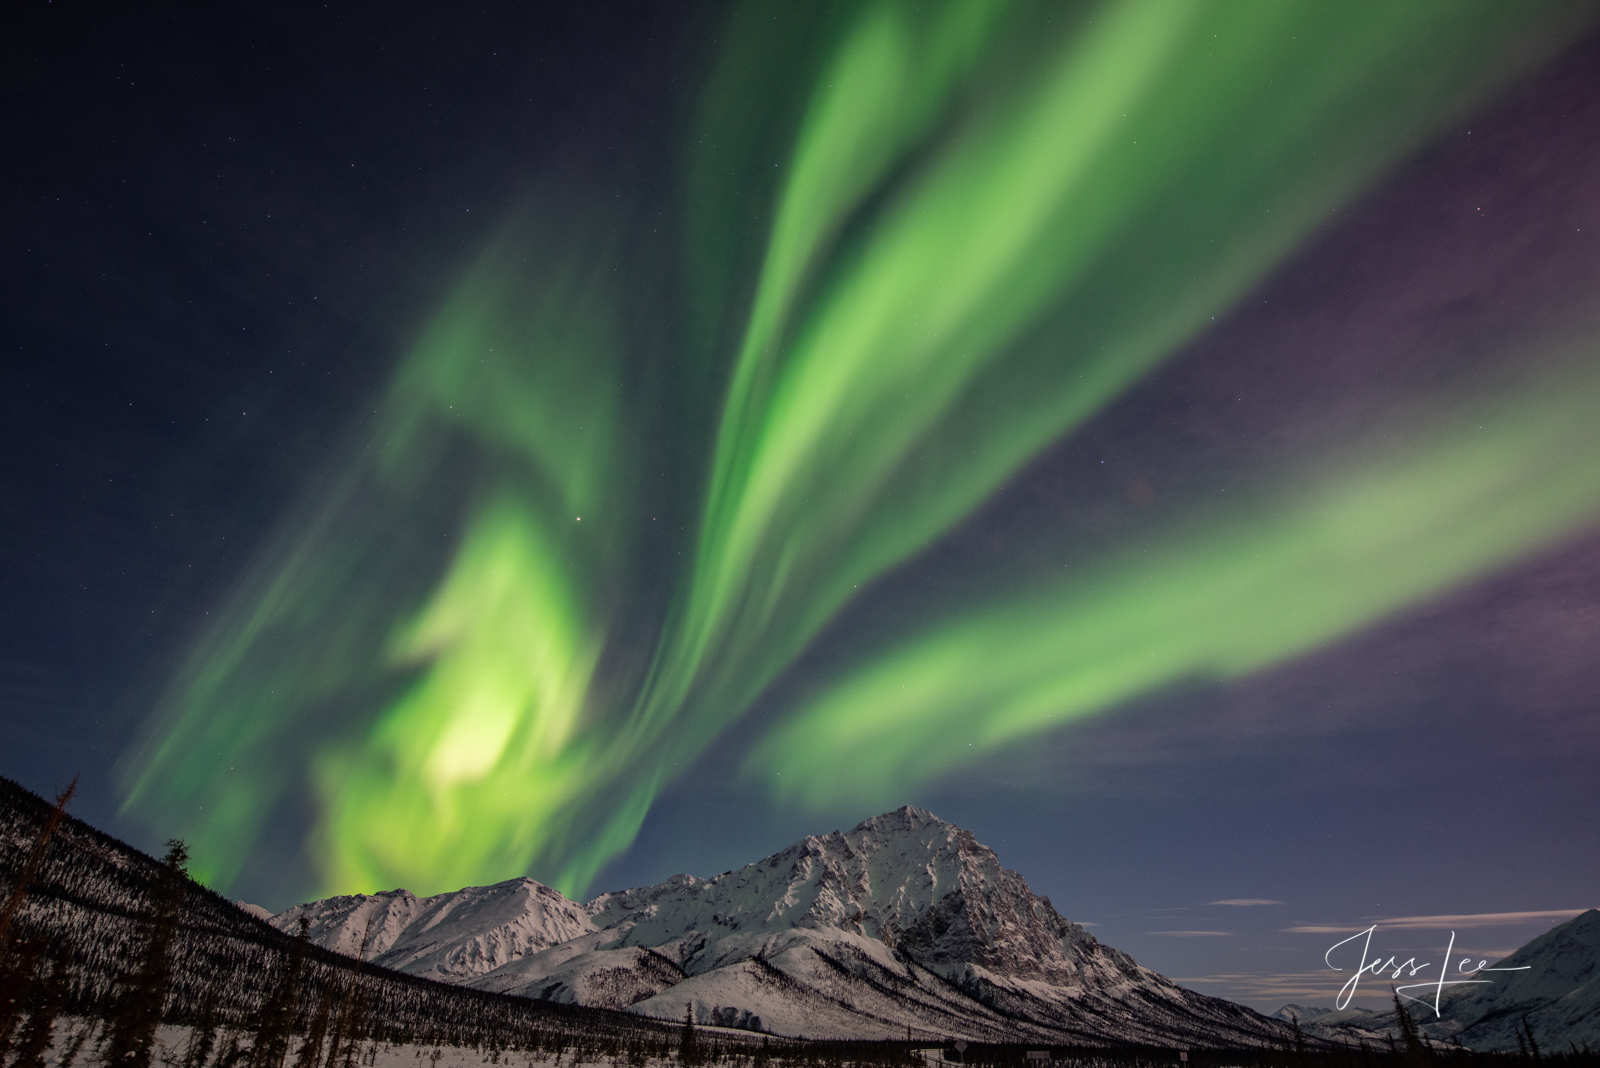 Limited Edition of 50 Exclusive high-resolution Museum Quality Fine Art Prints Of Aurora in the Arctic. Photos copyright © Jess...